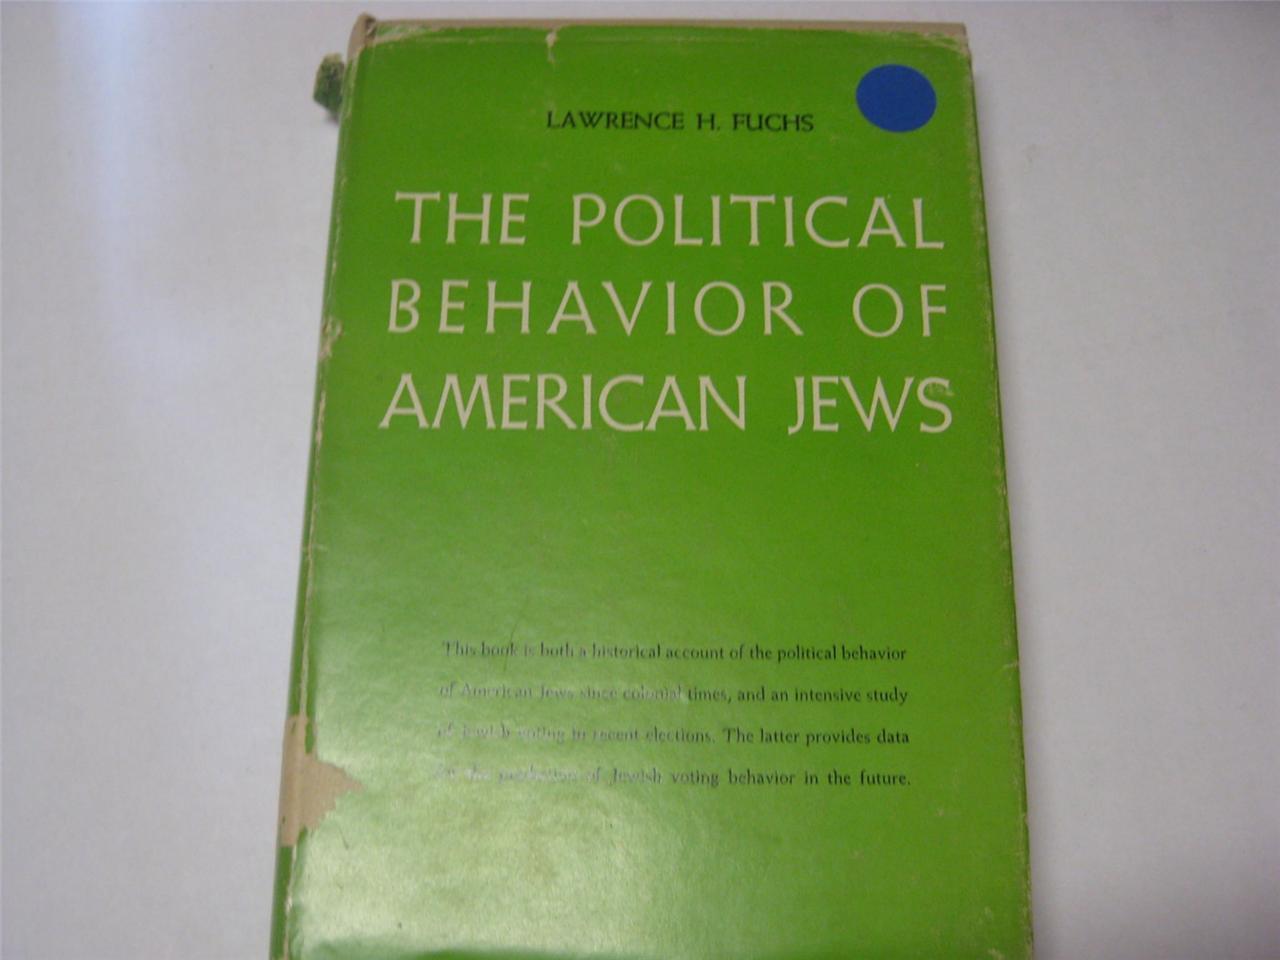 The Political Behavior of American Jews: by Lawrence H. Fuchs